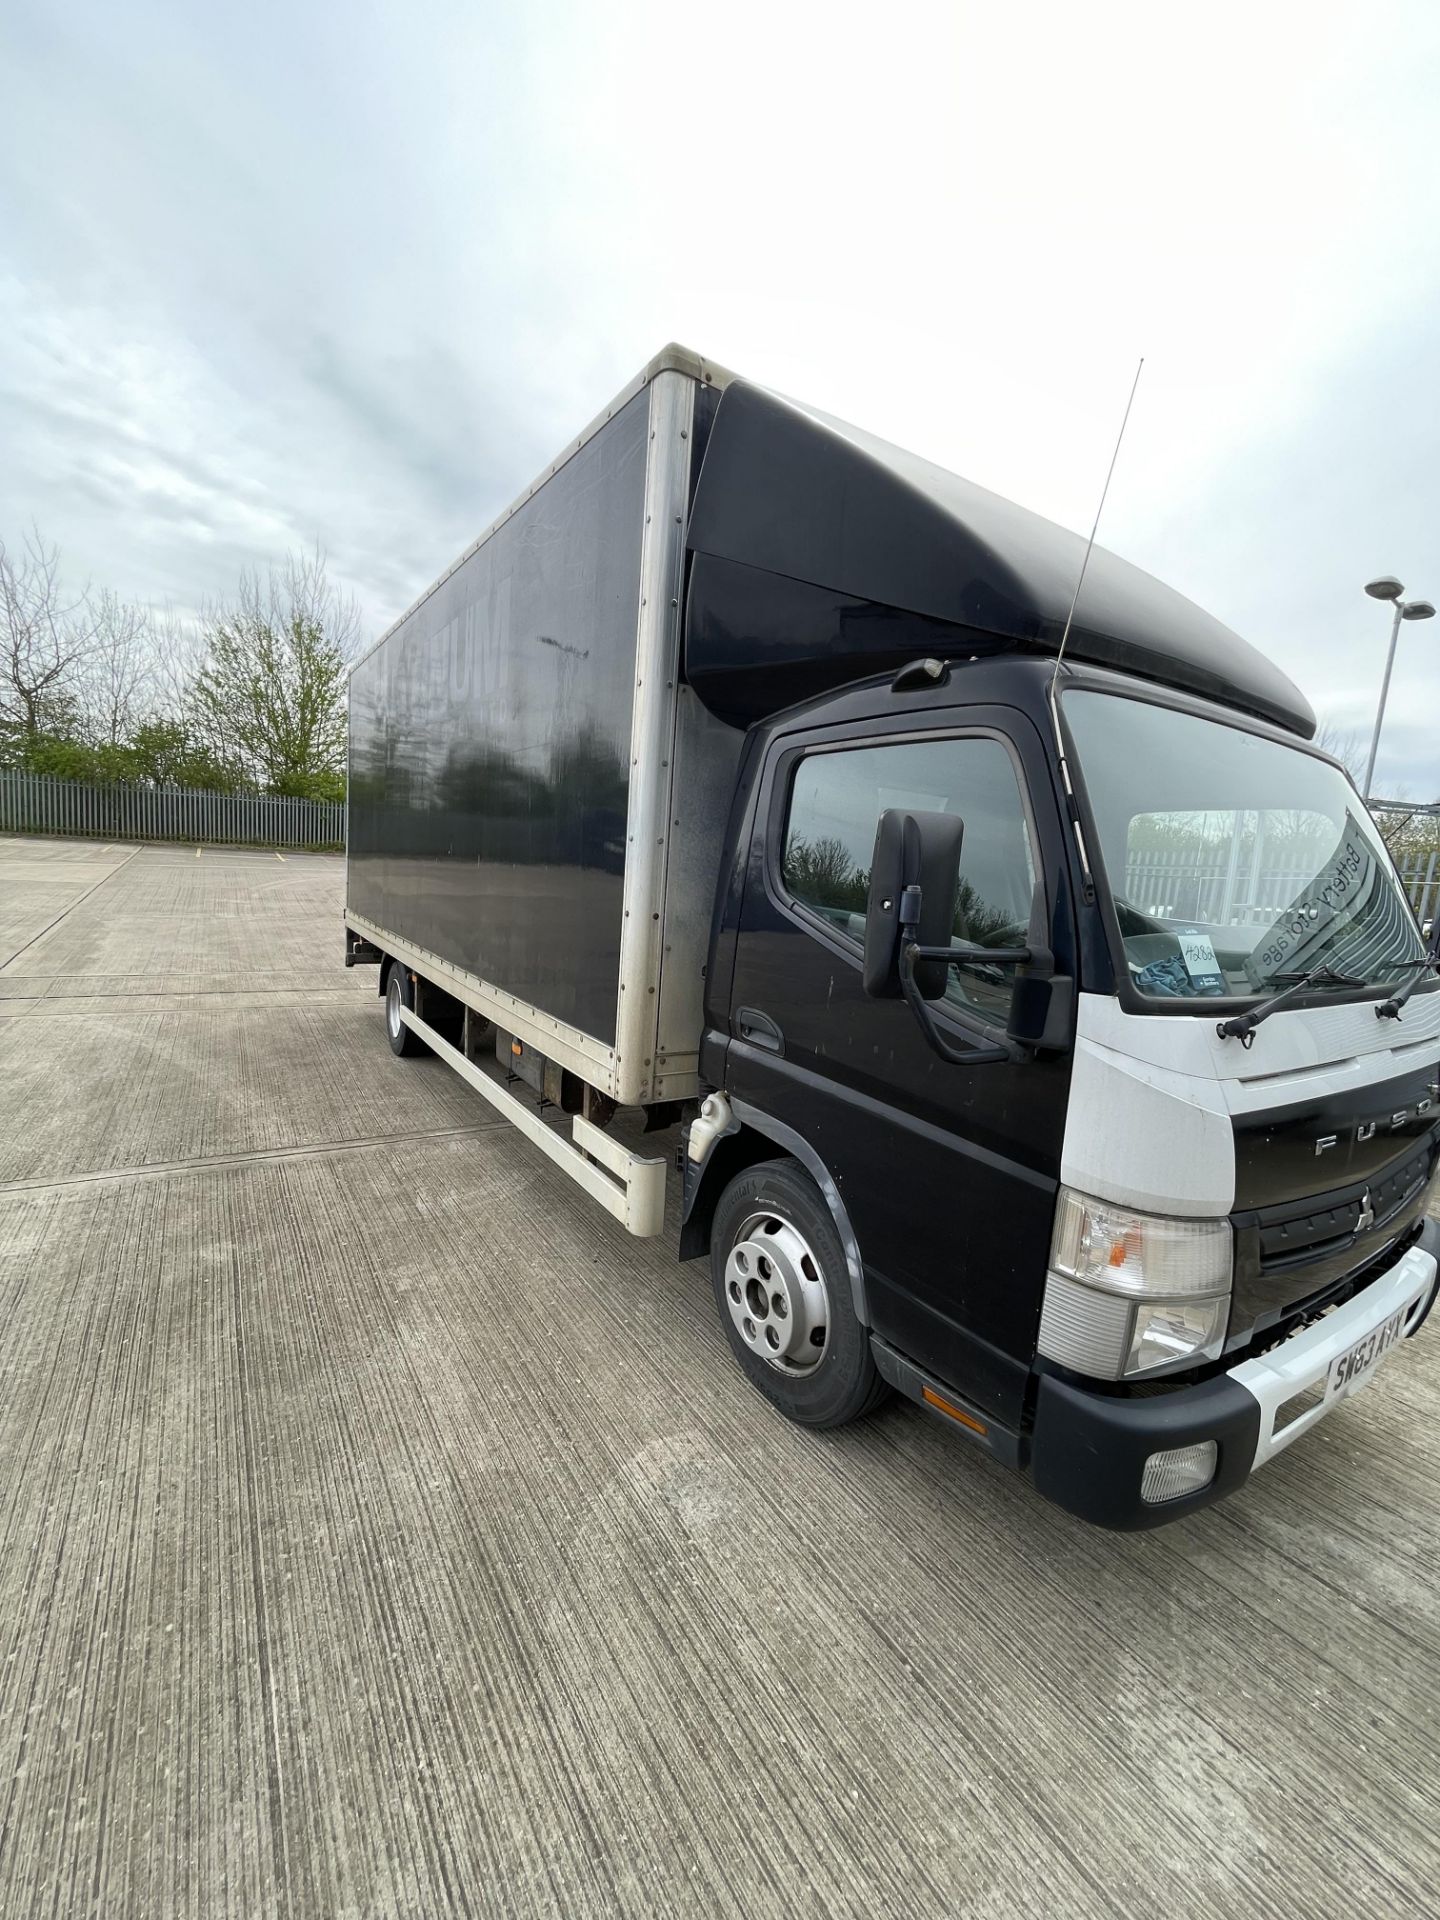 Mitsubishi Fuso Canter 7C15 47 box van (W63 AYX), date of first registration: 24/12/2013, odometer r - Image 3 of 8